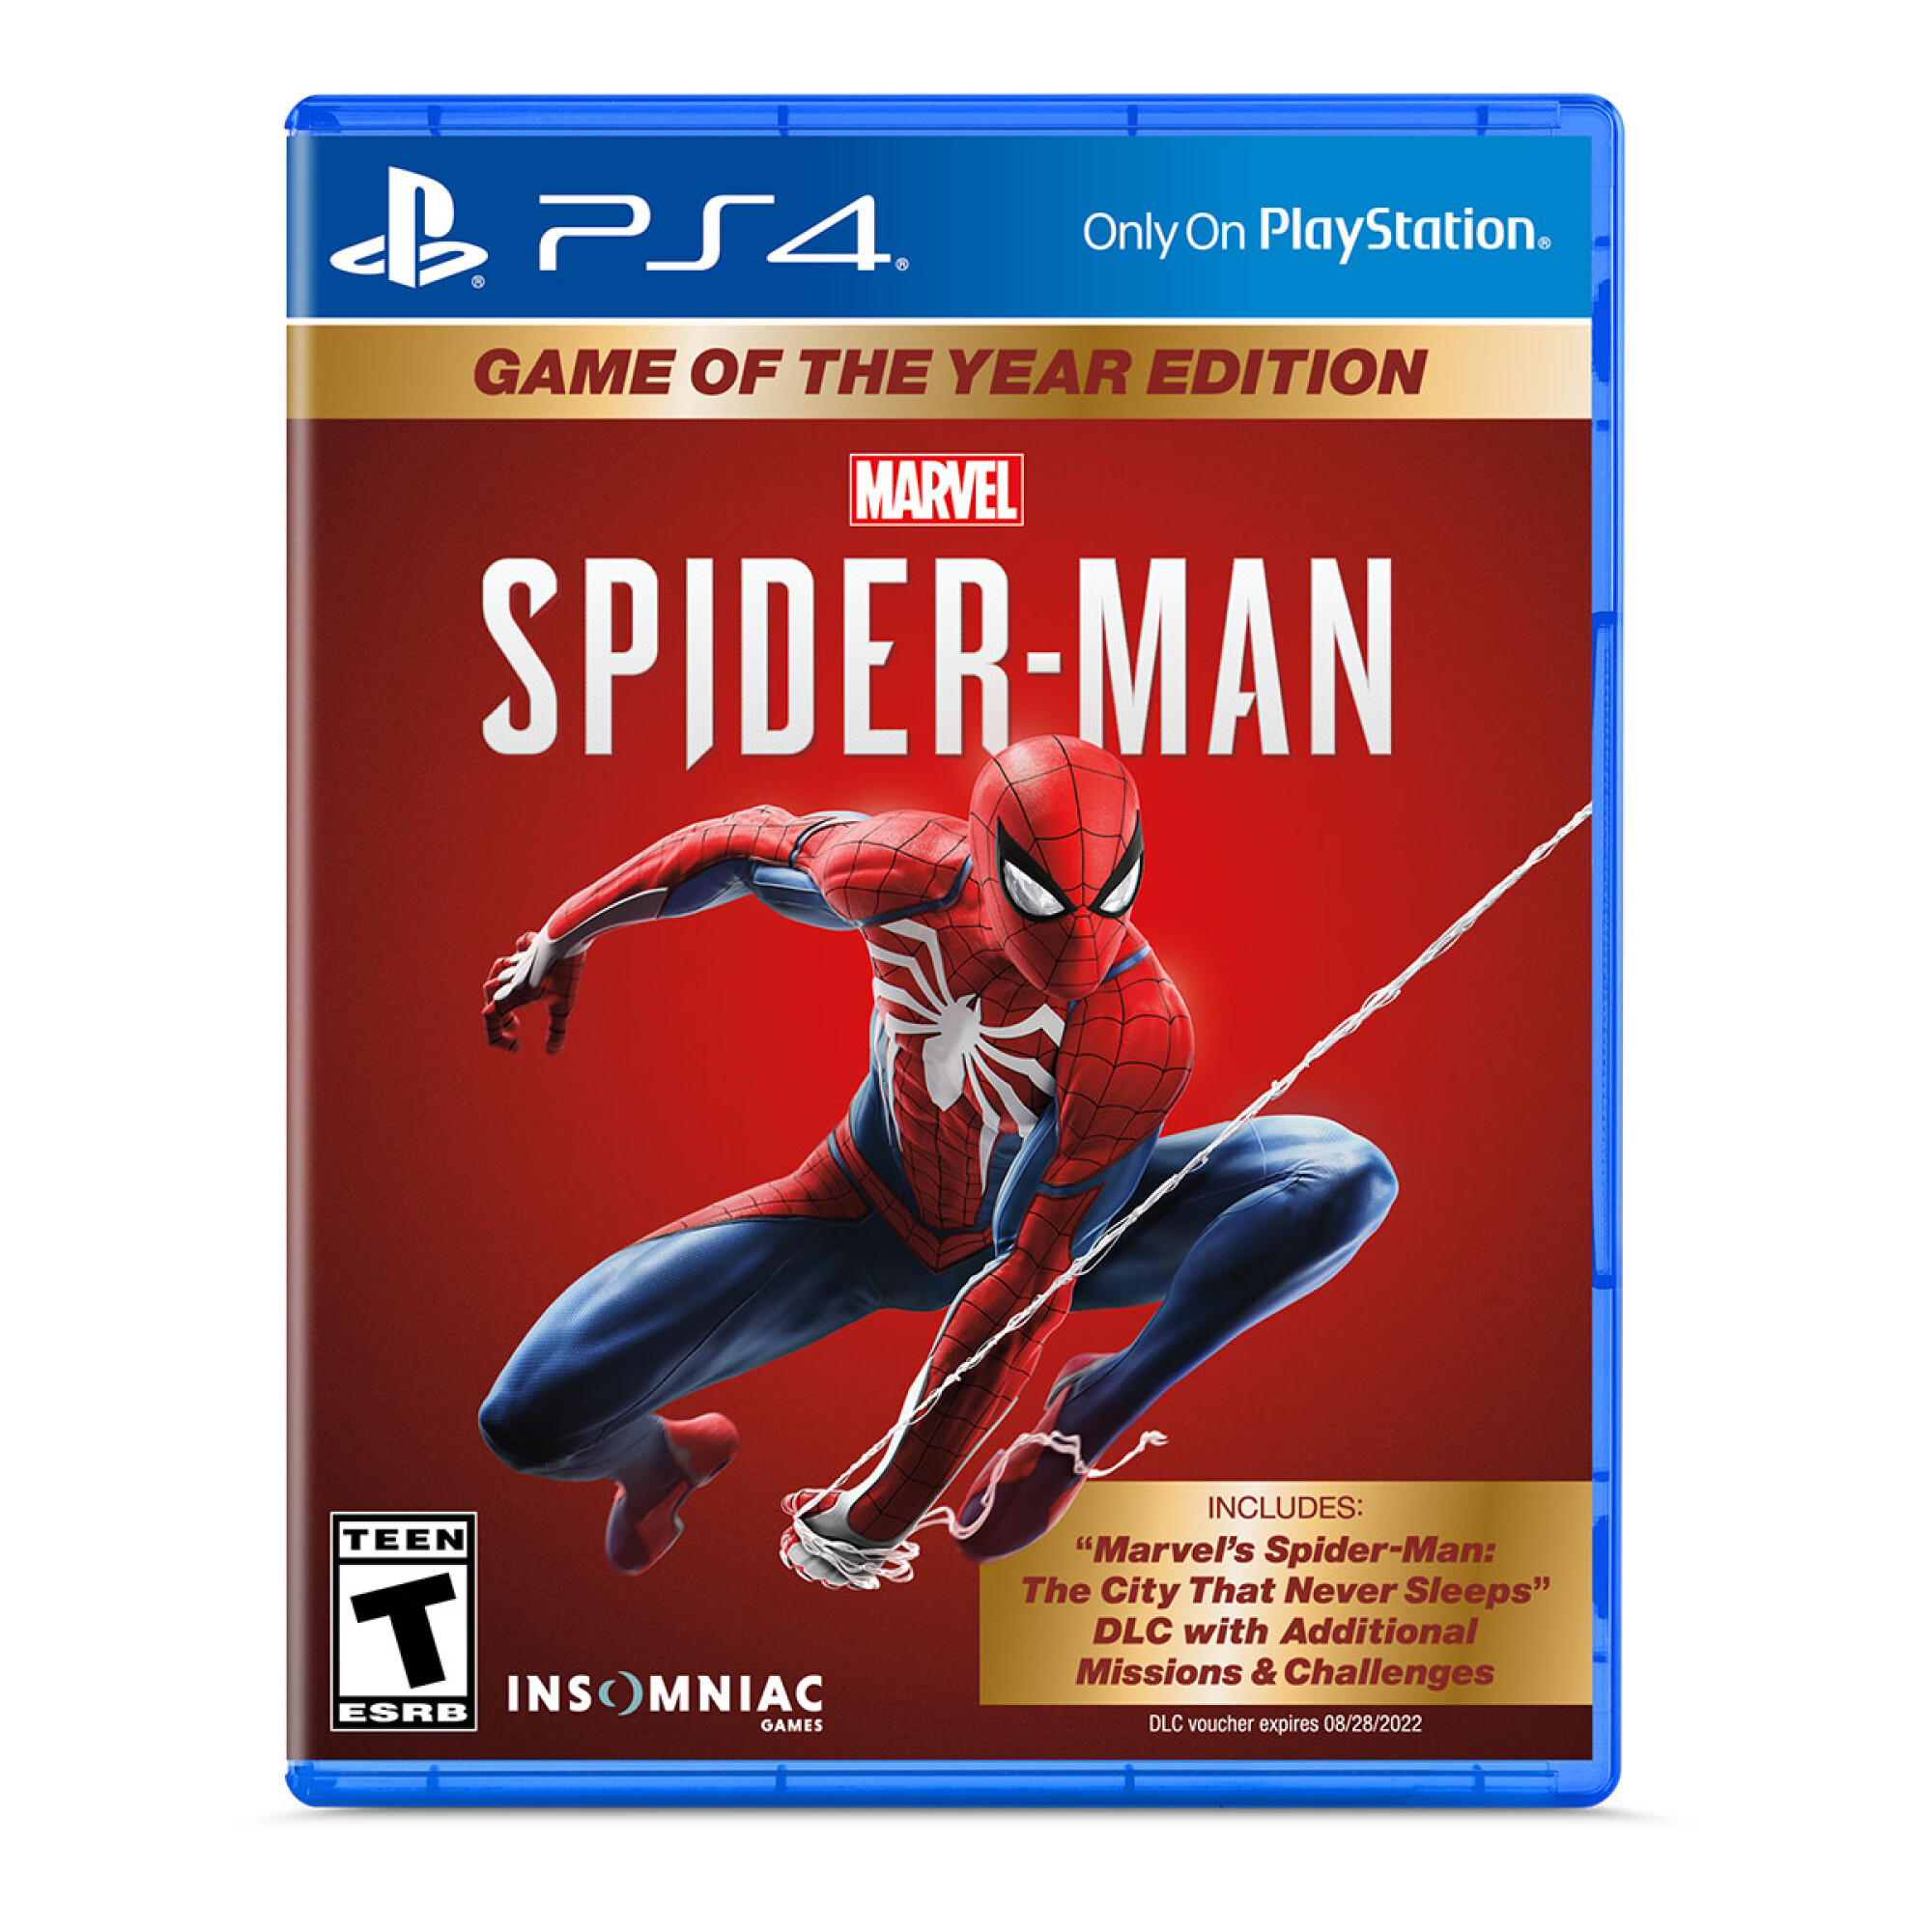 Marvel spiderman game of the year edition juego físico para ps4 / ps5 -  Juego fisico spider-man goty edition ps4 — Cover company